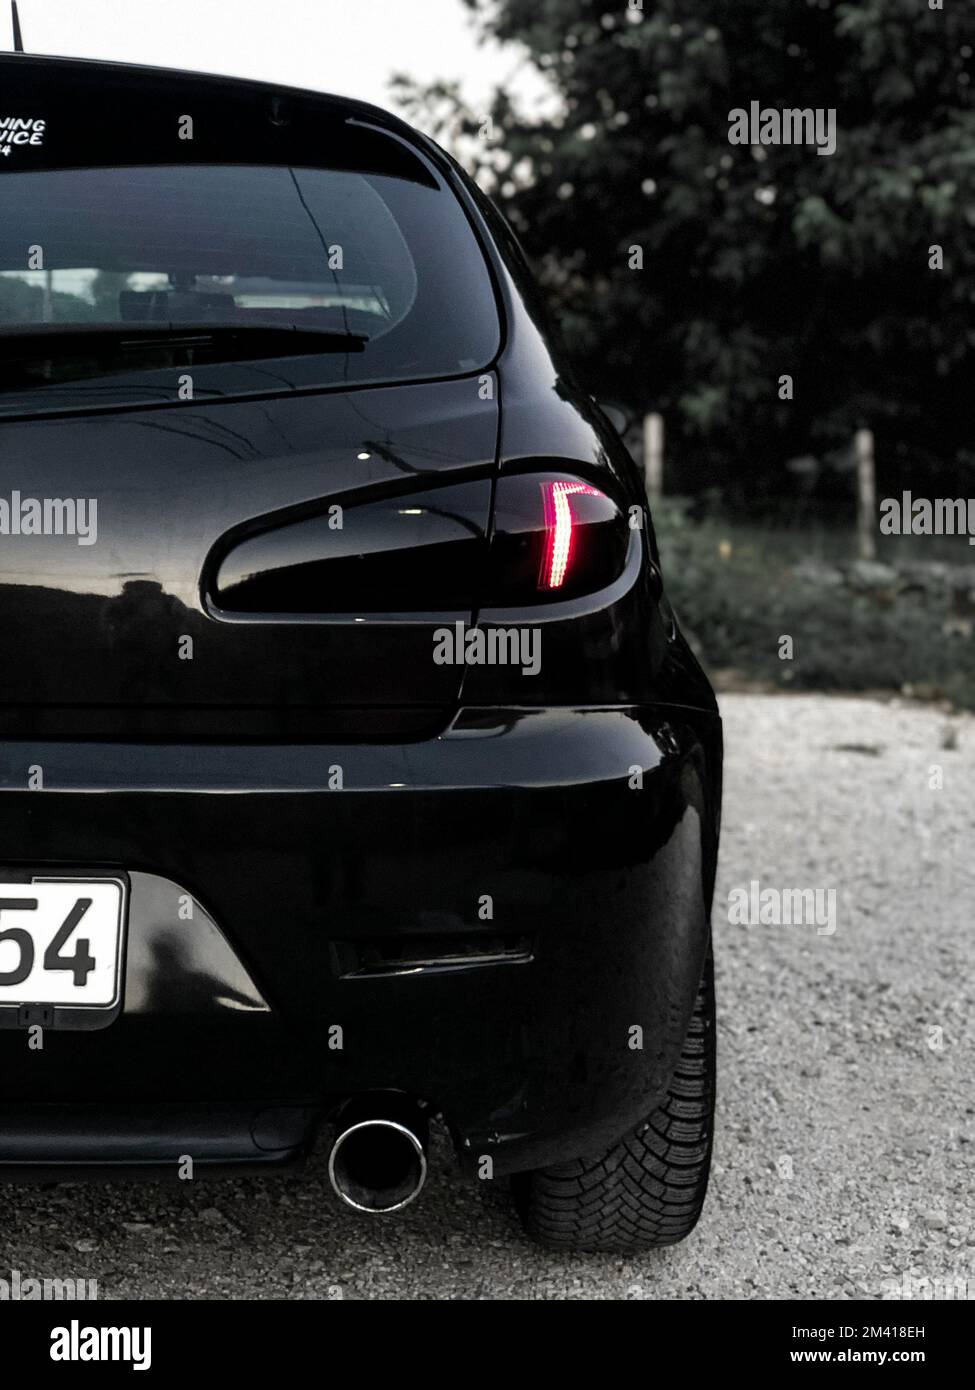 A rear view of a black Alfa Romeo 147 sports car parked outdoors Stock  Photo - Alamy